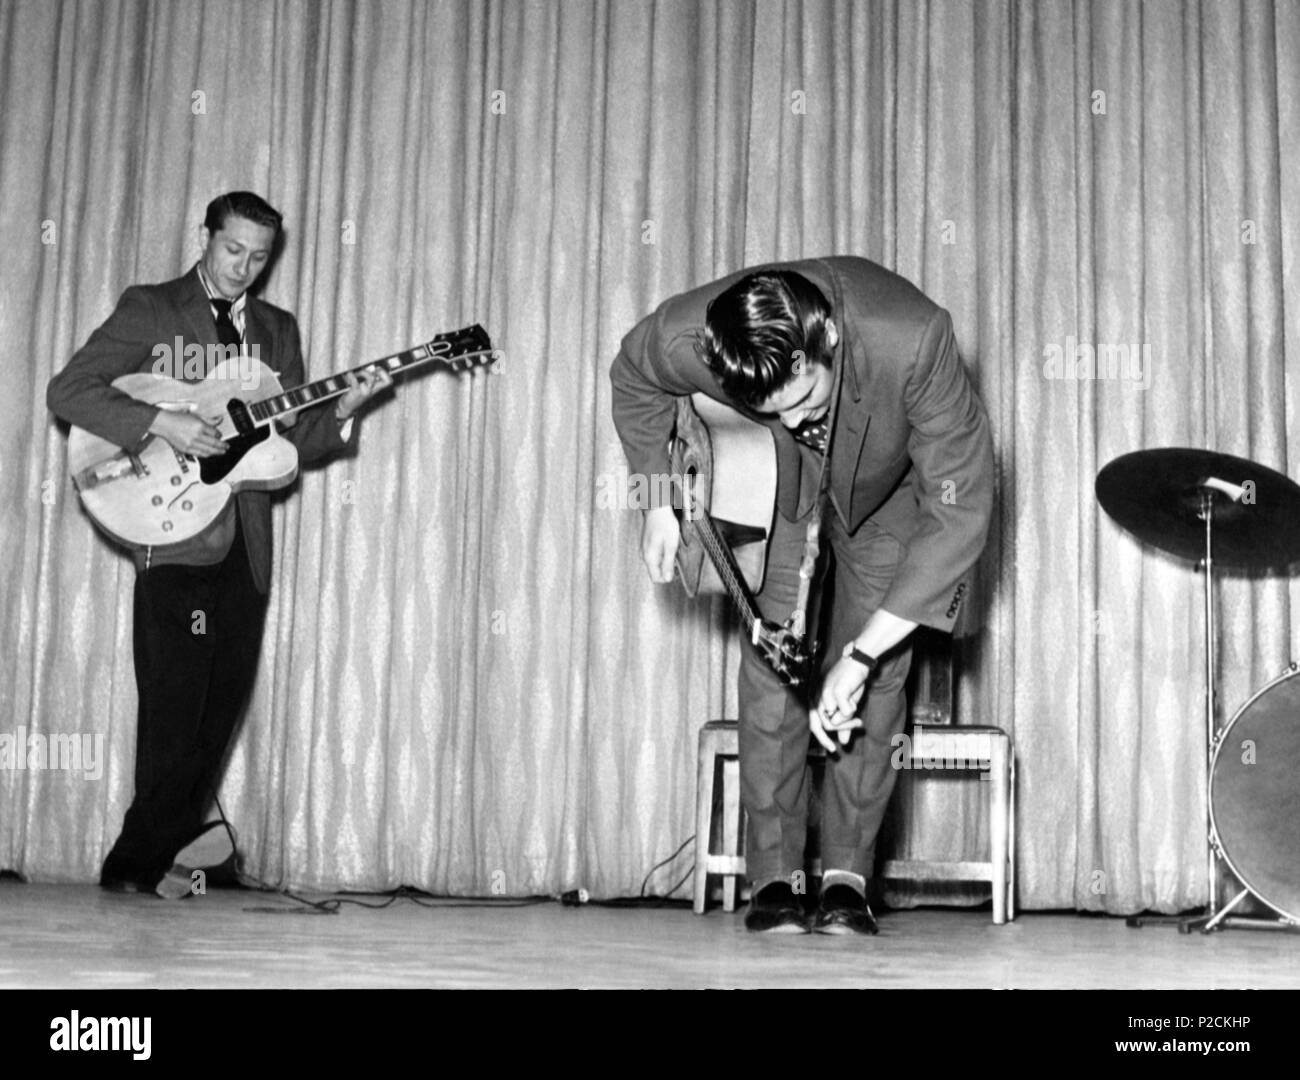 The American singer Elvis Presley perfoming in the 1950´s with the American guitarist Scotty Moore. Stock Photo